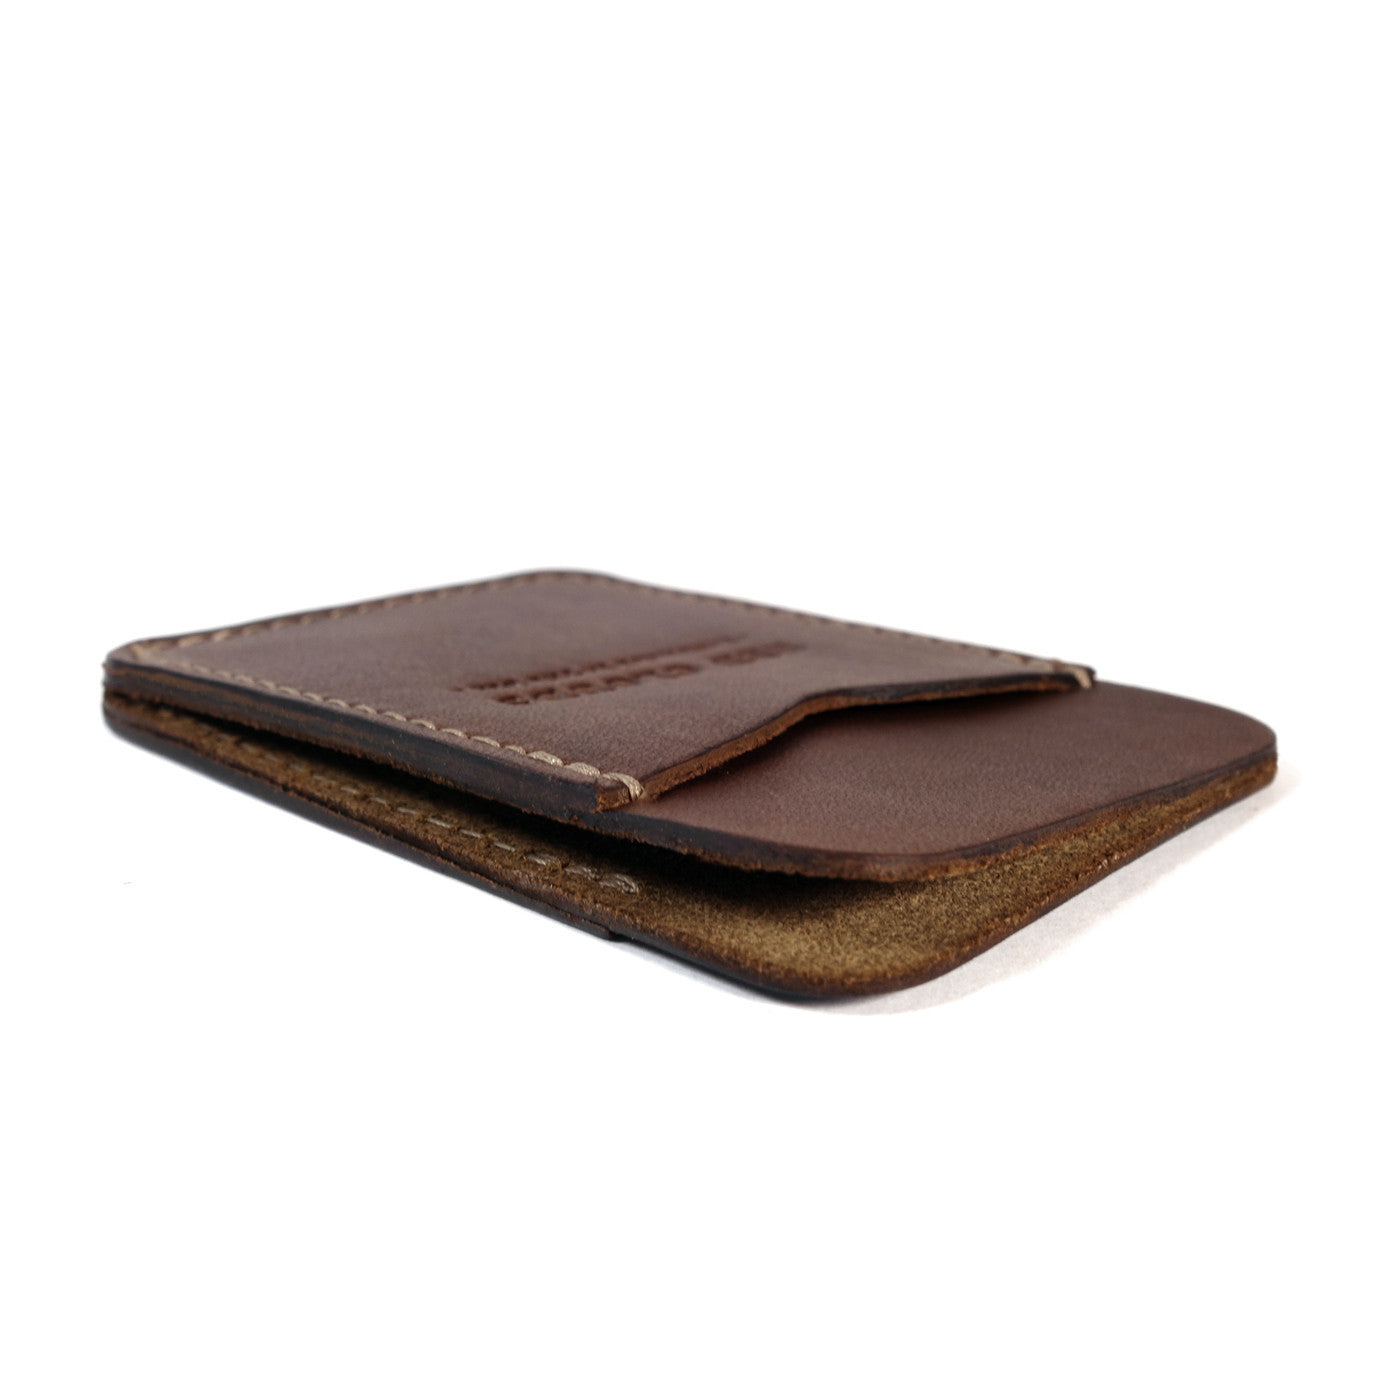 Frontside wallet. Card wallet. slim card case. leather card wallet. For those who like to keep their wallets in their front pockets. Slim enough to comfortably carry and large enough to fit your essential cards and some cash.  3/4oz Herman Oak Vegetable-Tanned Leather 2 Card-Slots, 1 center card slot